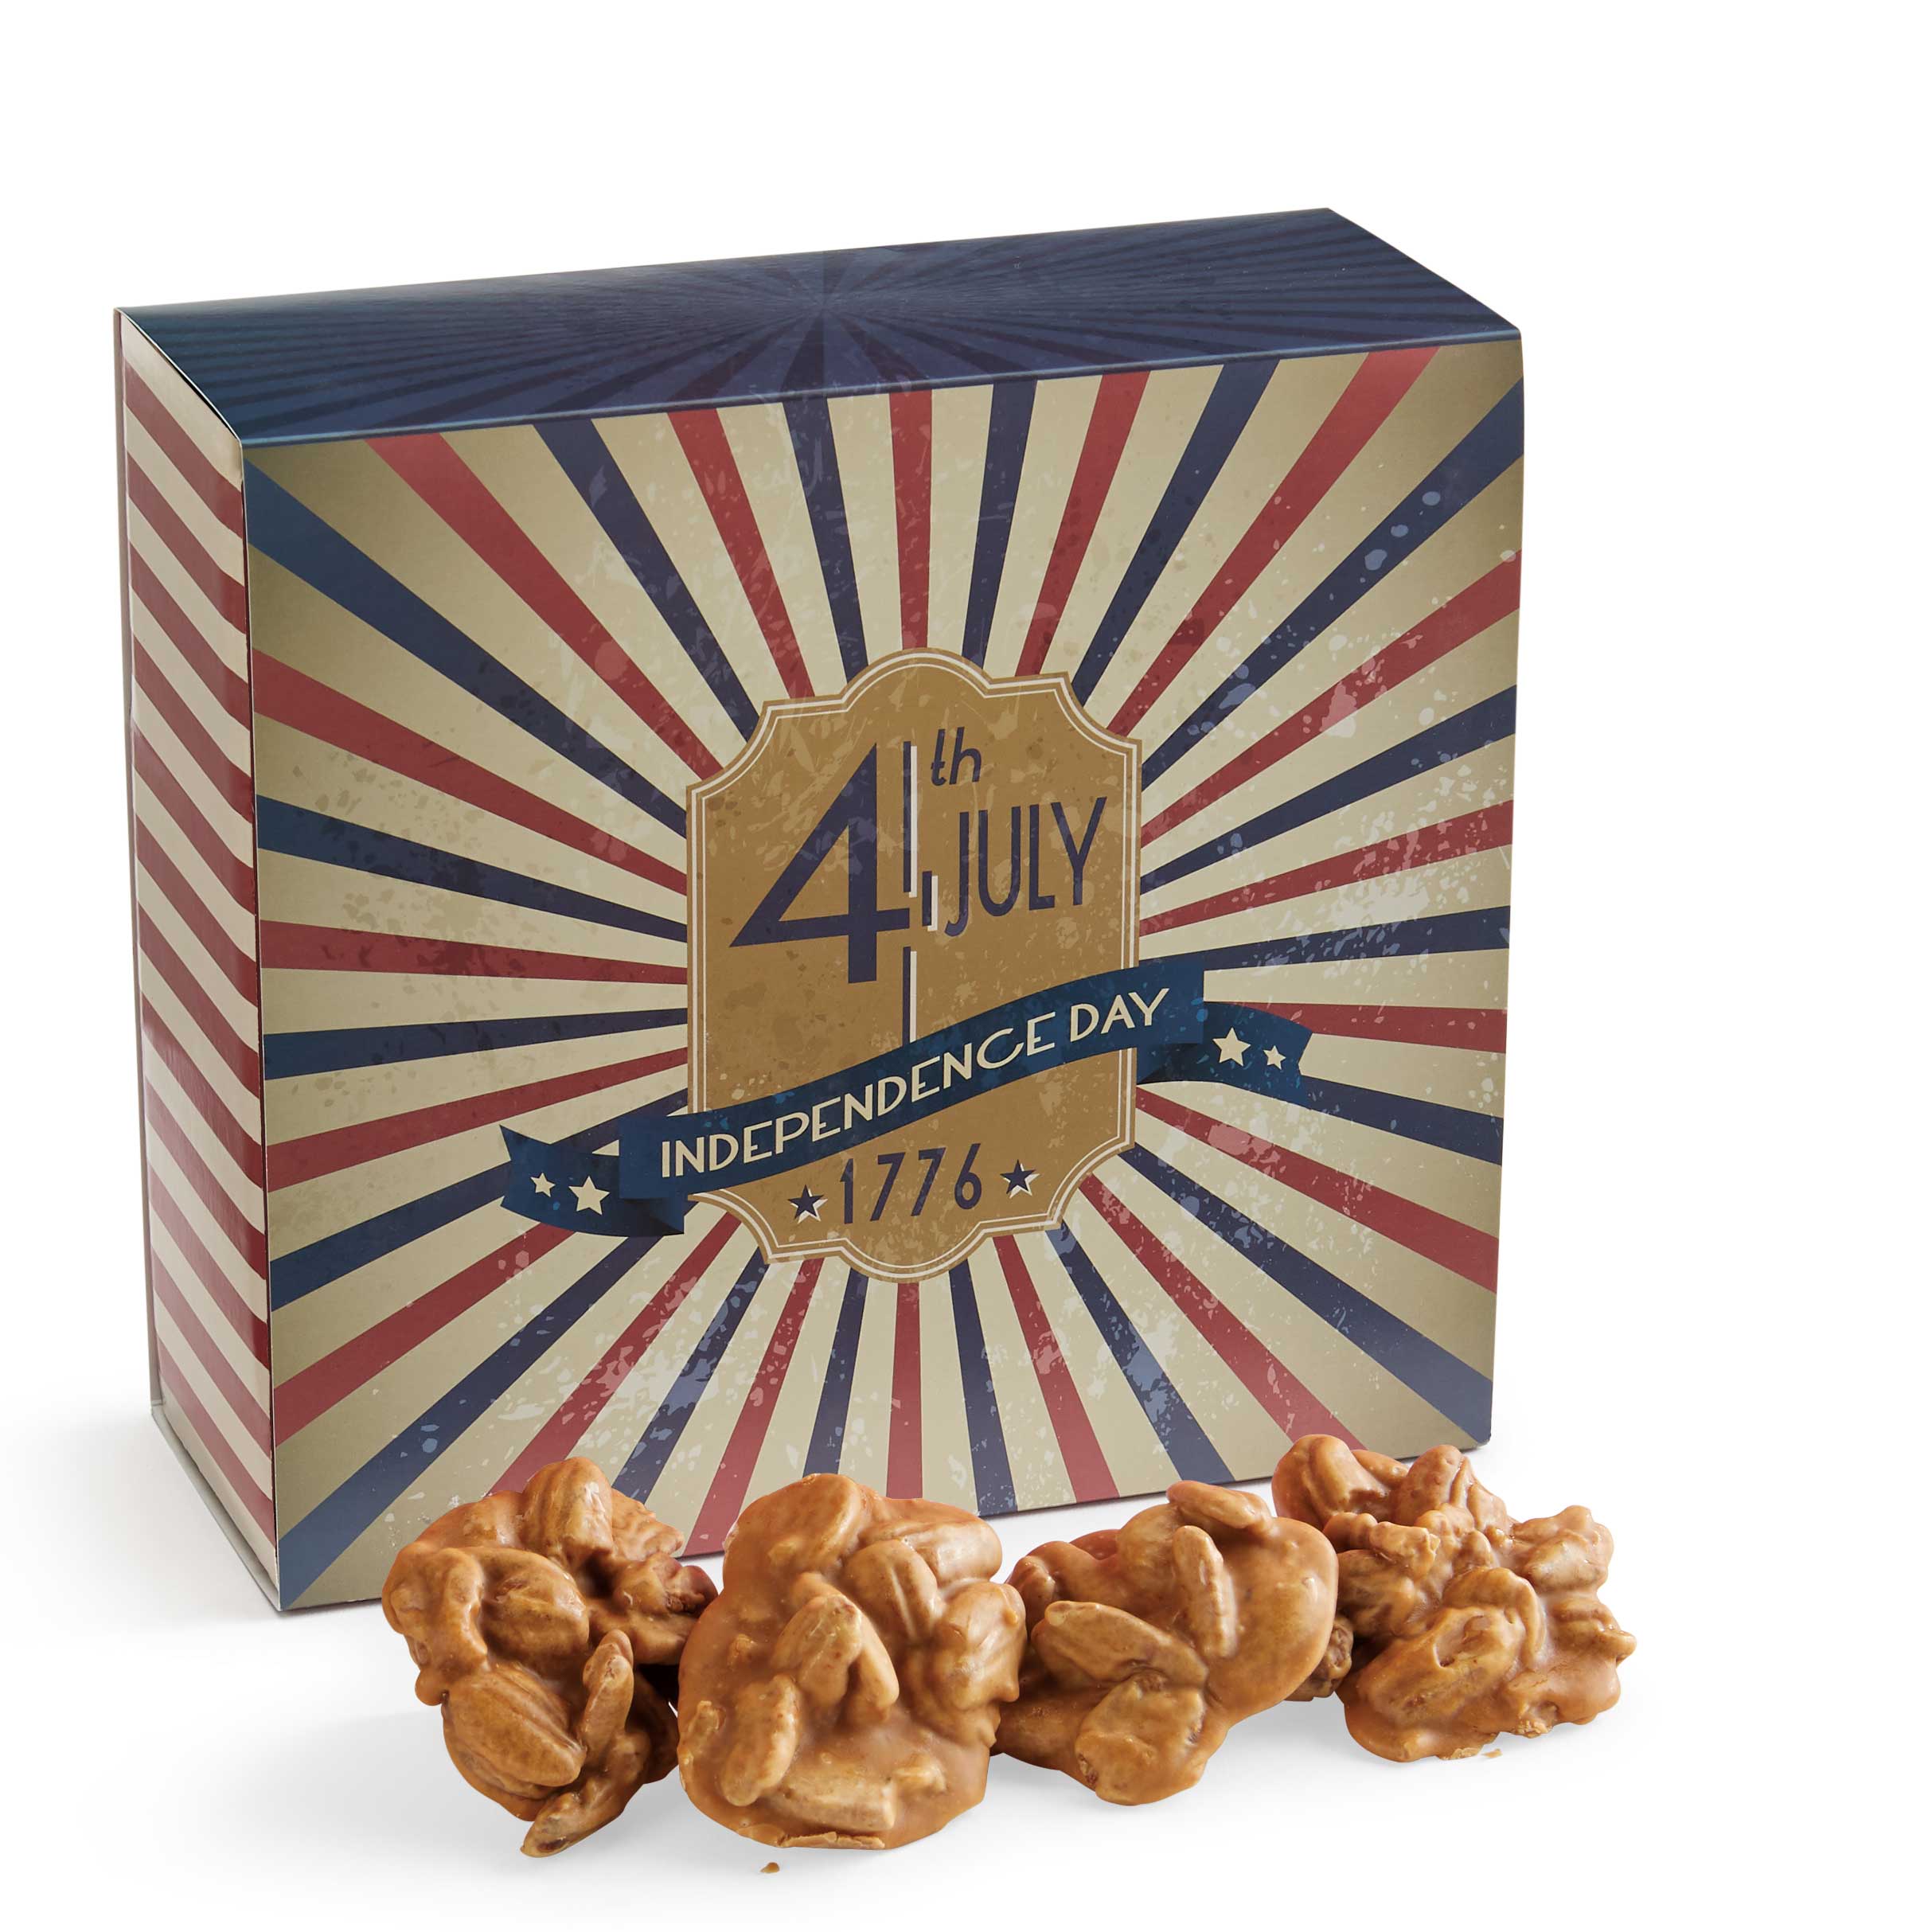 24 Piece Original Pralines in the 4th of July Gift Box